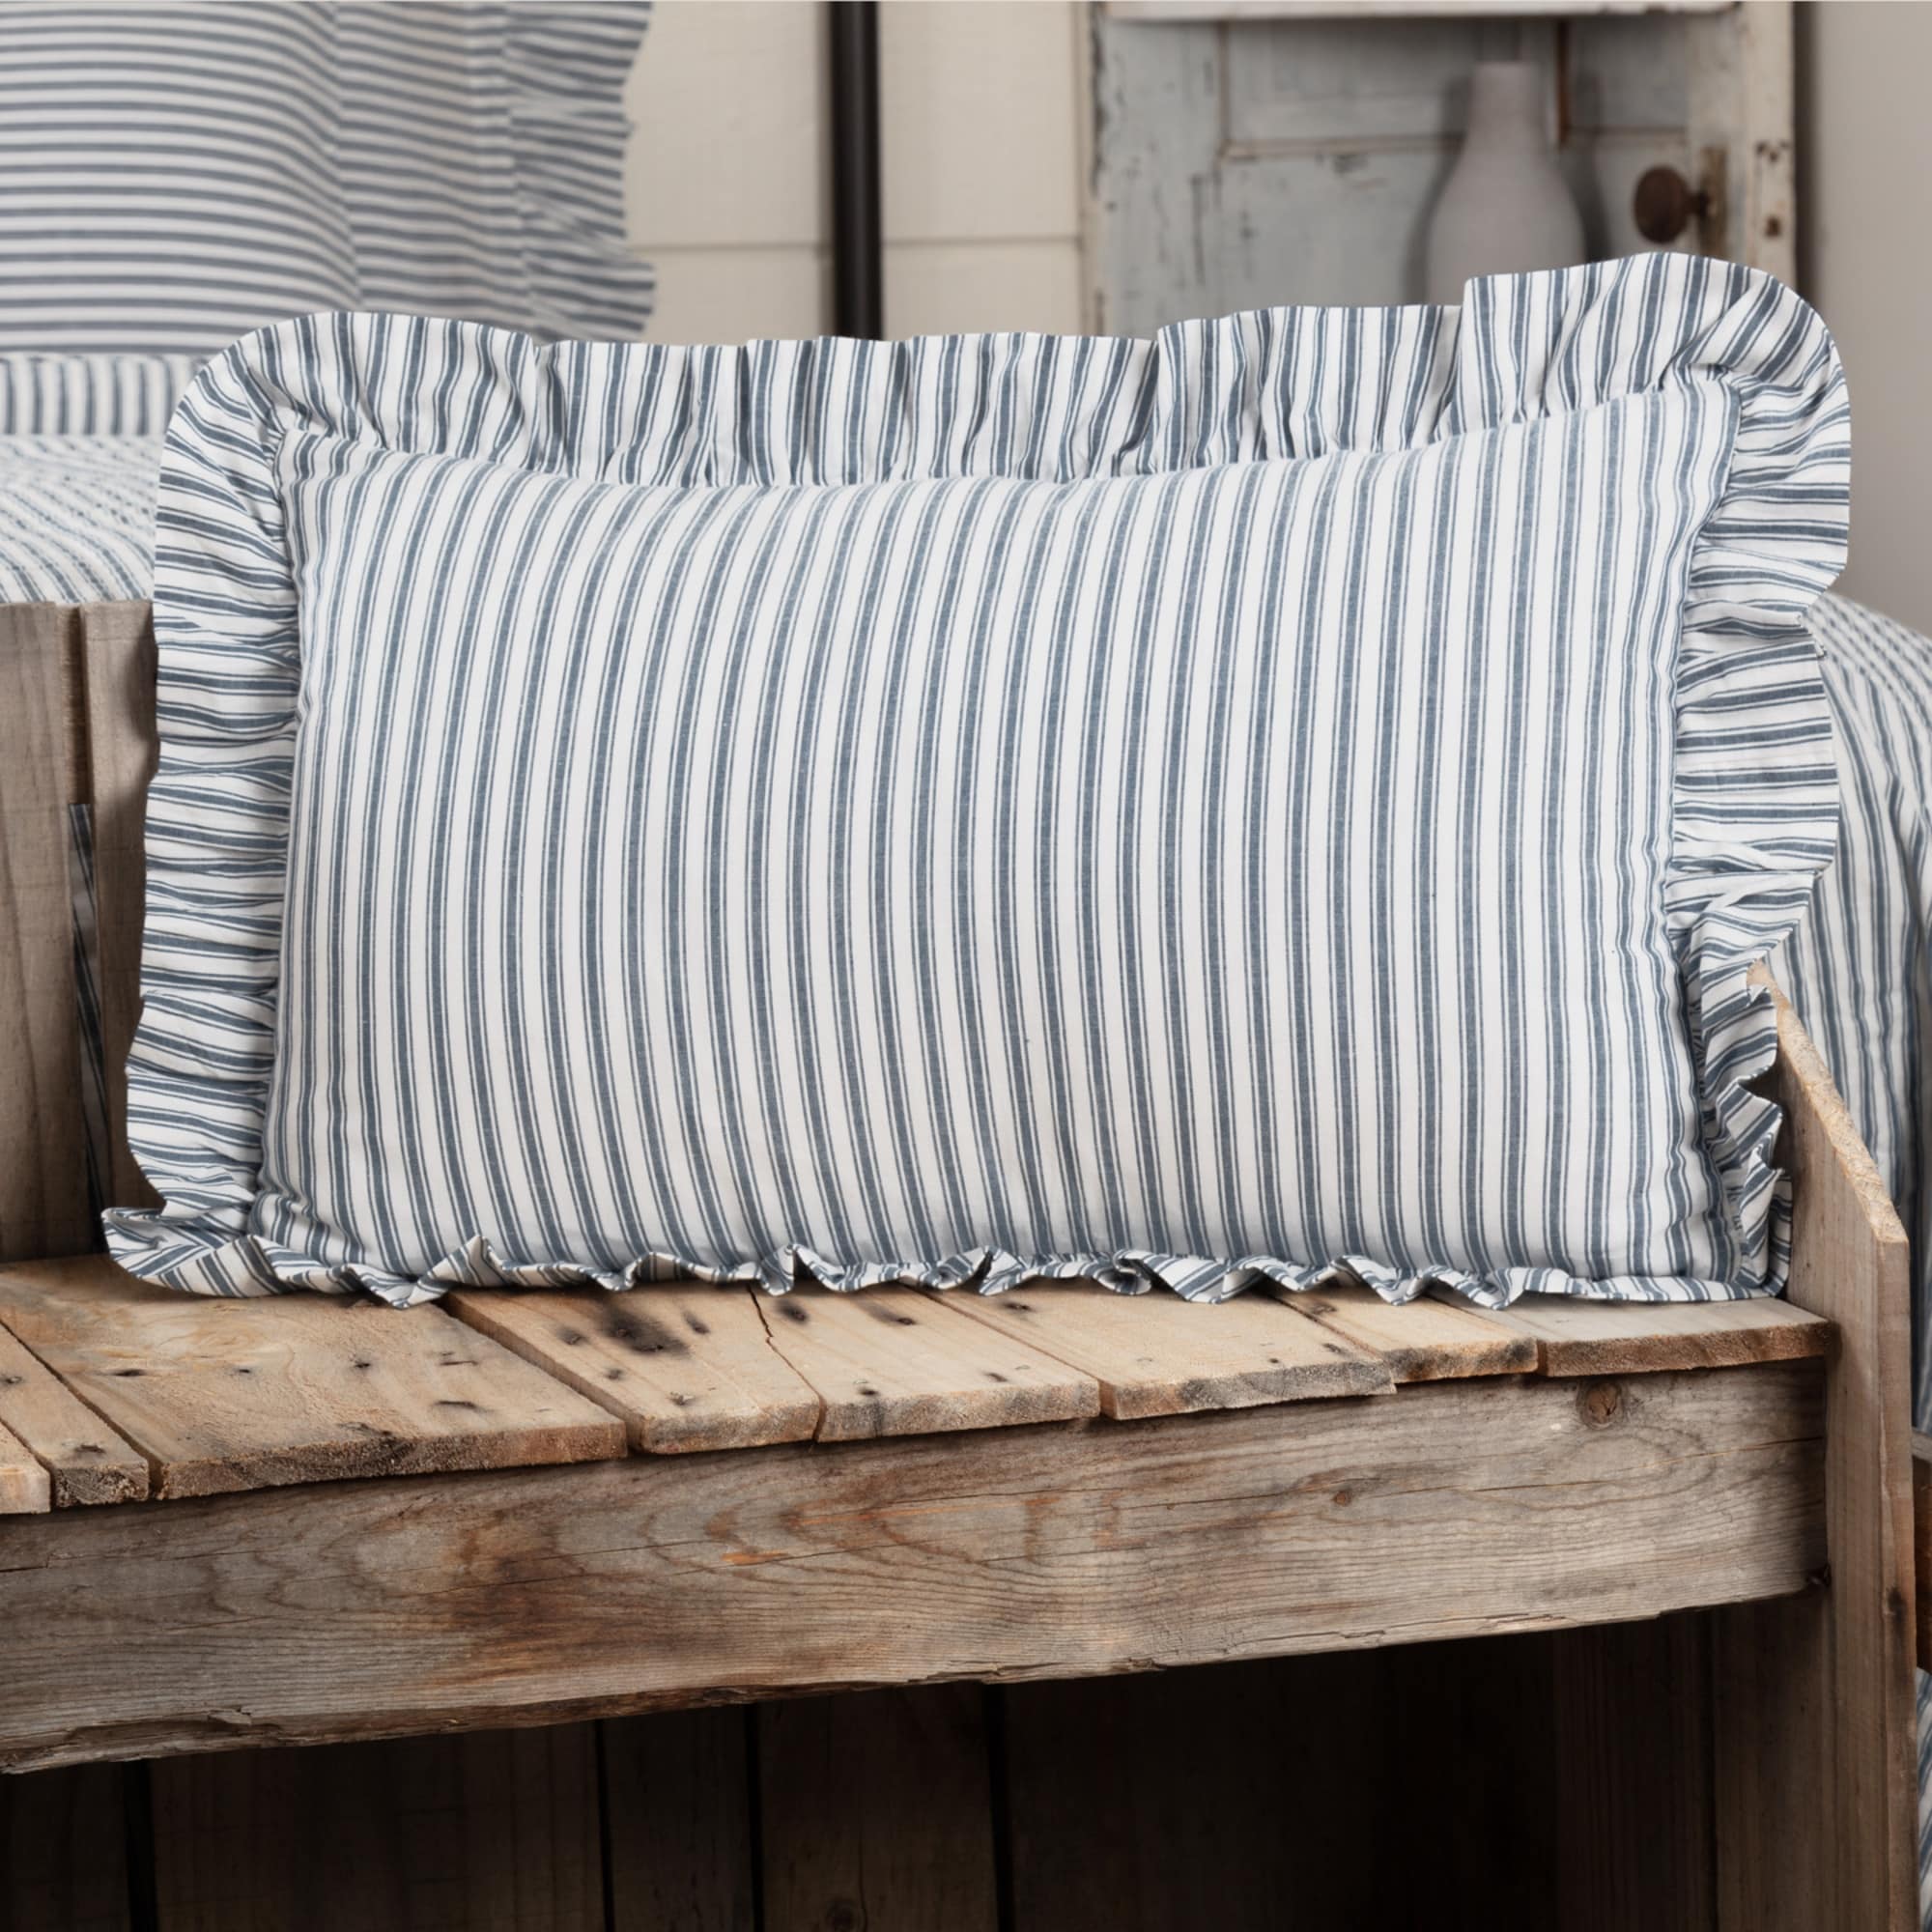 https://ak1.ostkcdn.com/images/products/is/images/direct/70926f82ec53c2becf0443be85883009f8f3b40a/Sawyer-Mill-Ticking-Stripe-Pillow.jpg